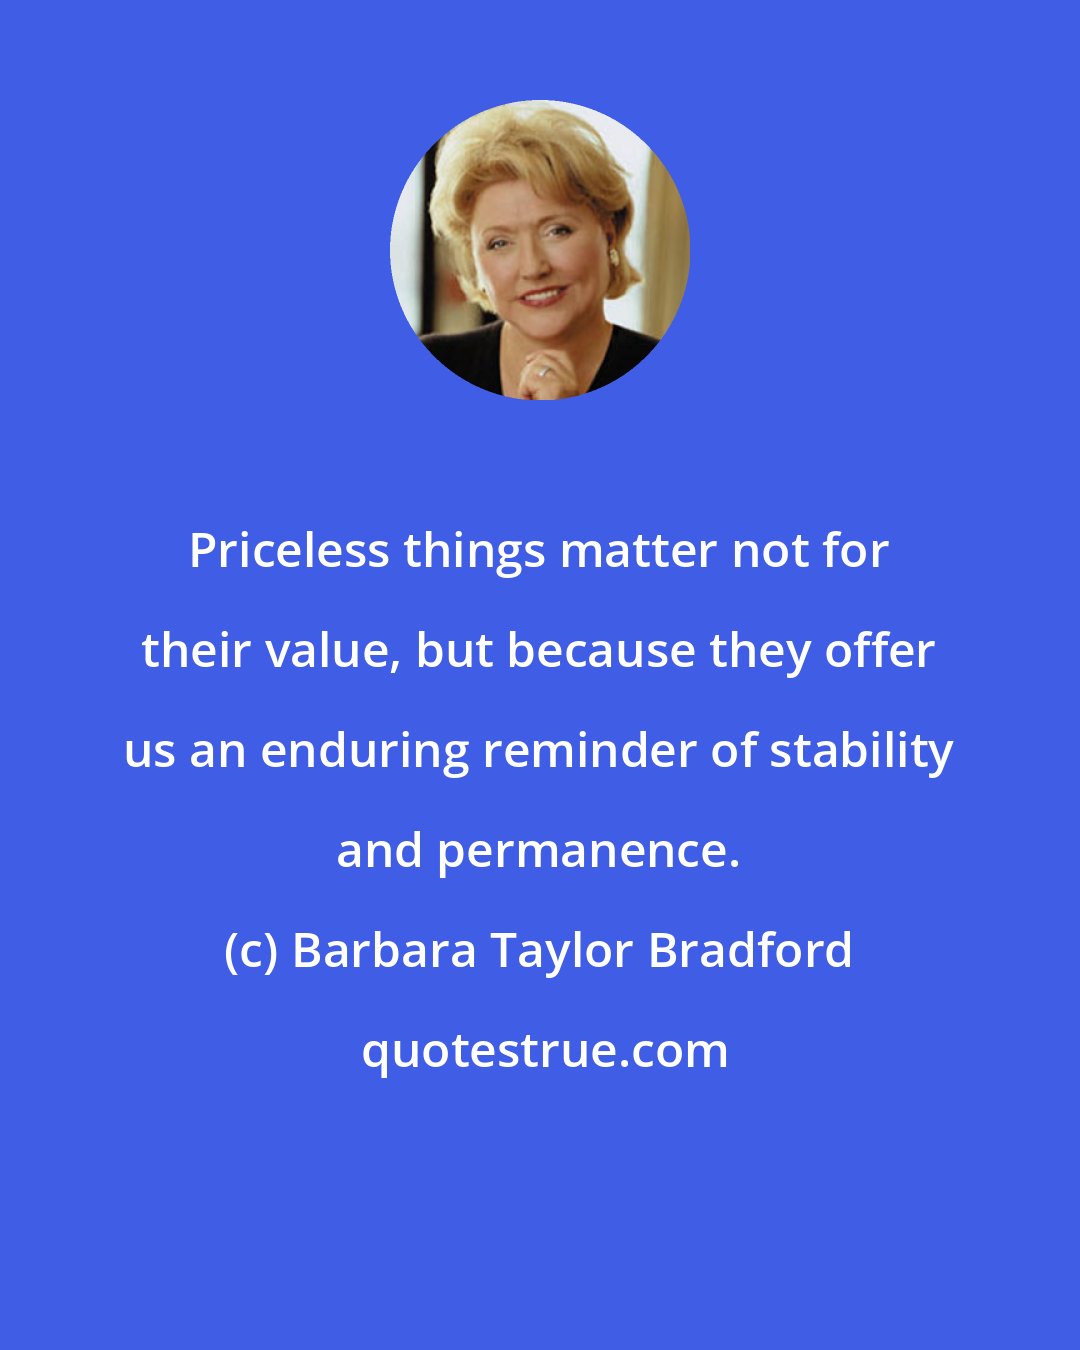 Barbara Taylor Bradford: Priceless things matter not for their value, but because they offer us an enduring reminder of stability and permanence.